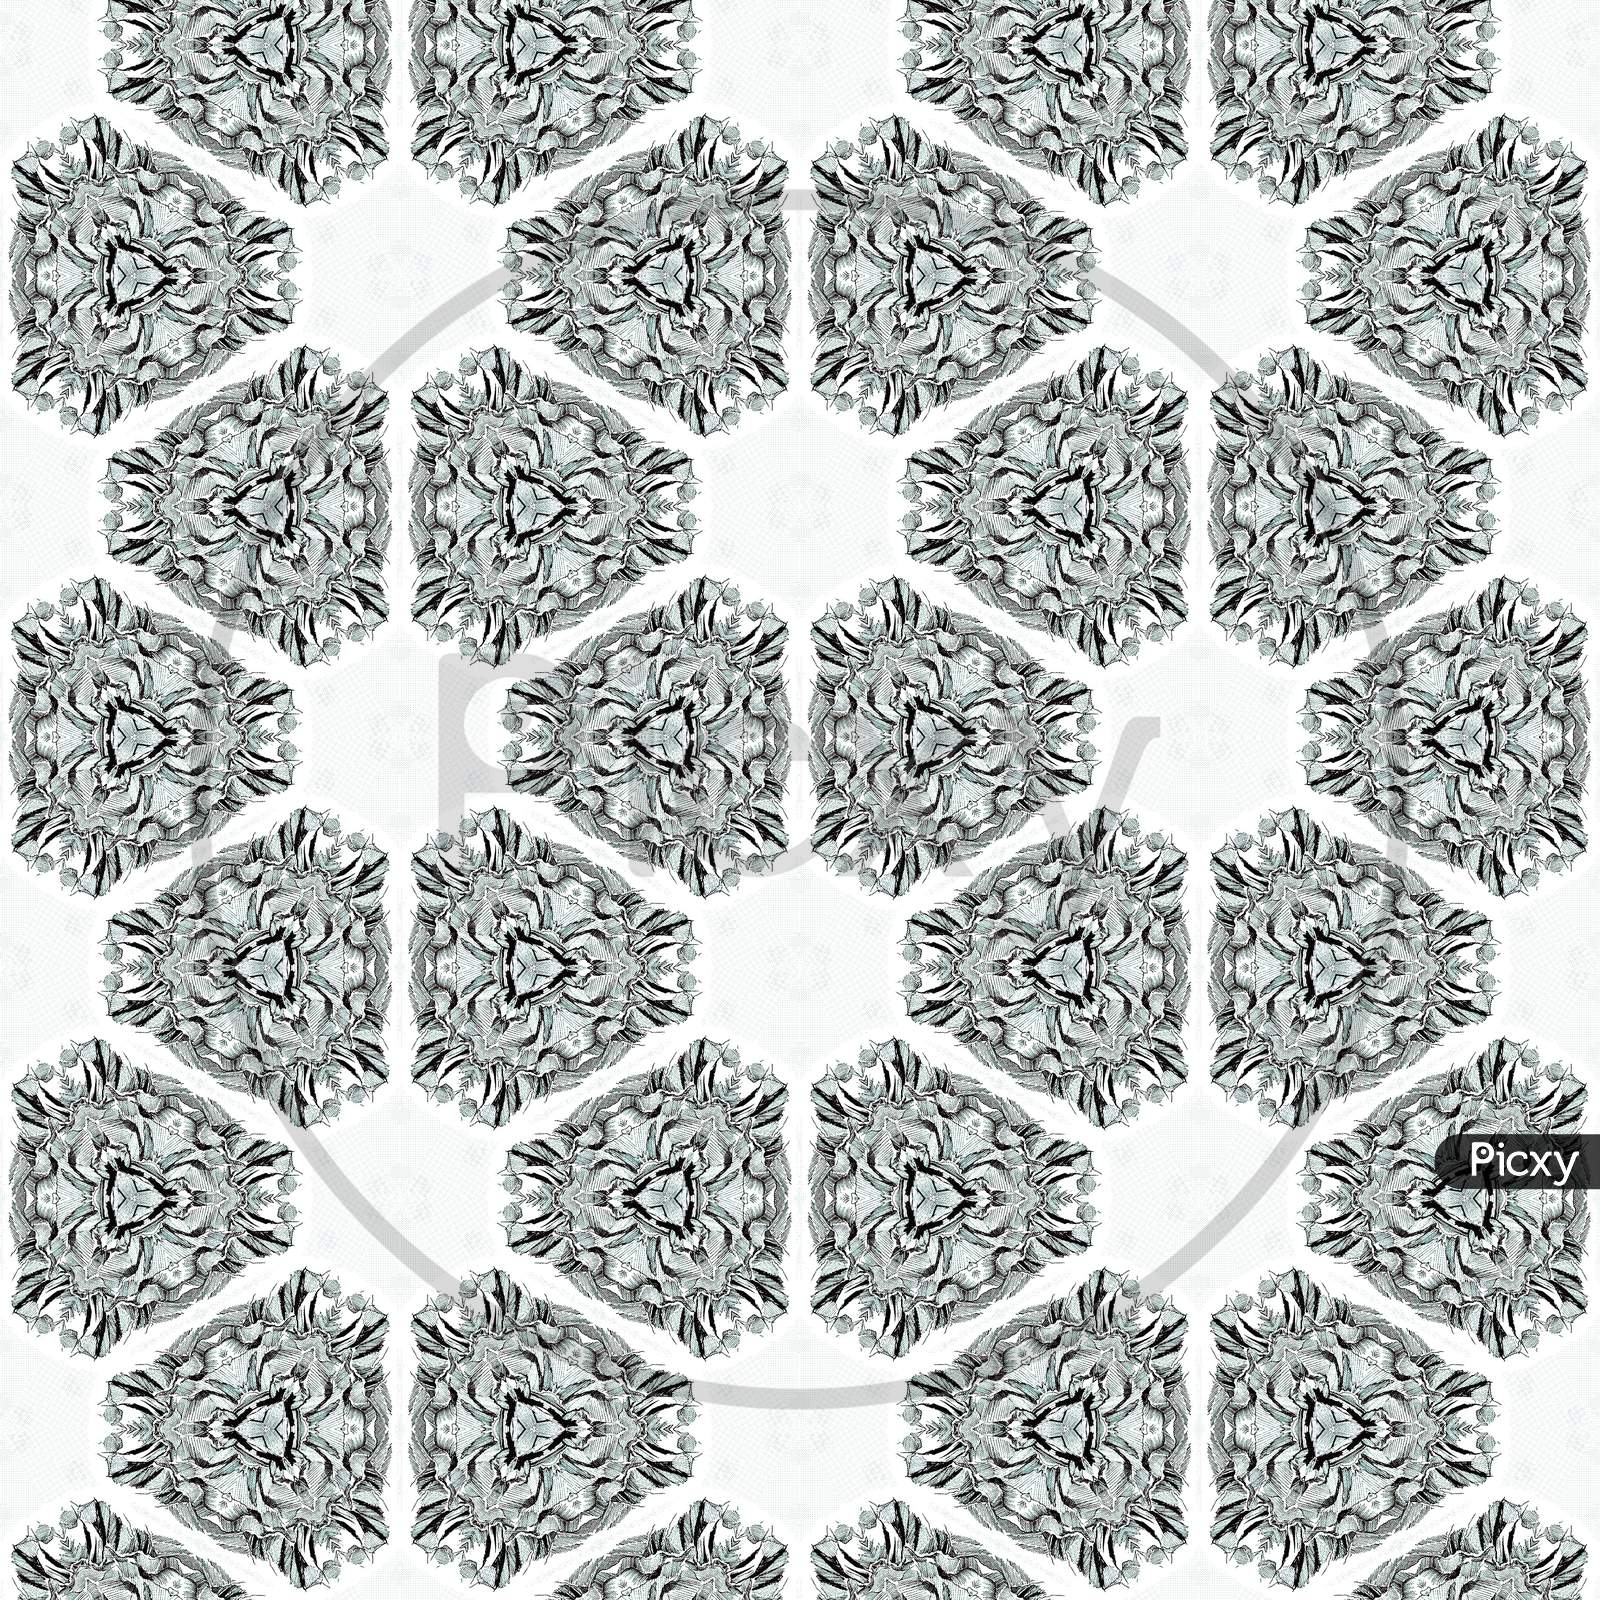 Elegant And Ornamental Monochromatic Pattern And Designs On Solid Sheet Of Wallpaper. Concept Of Home Decor And Interior Designing